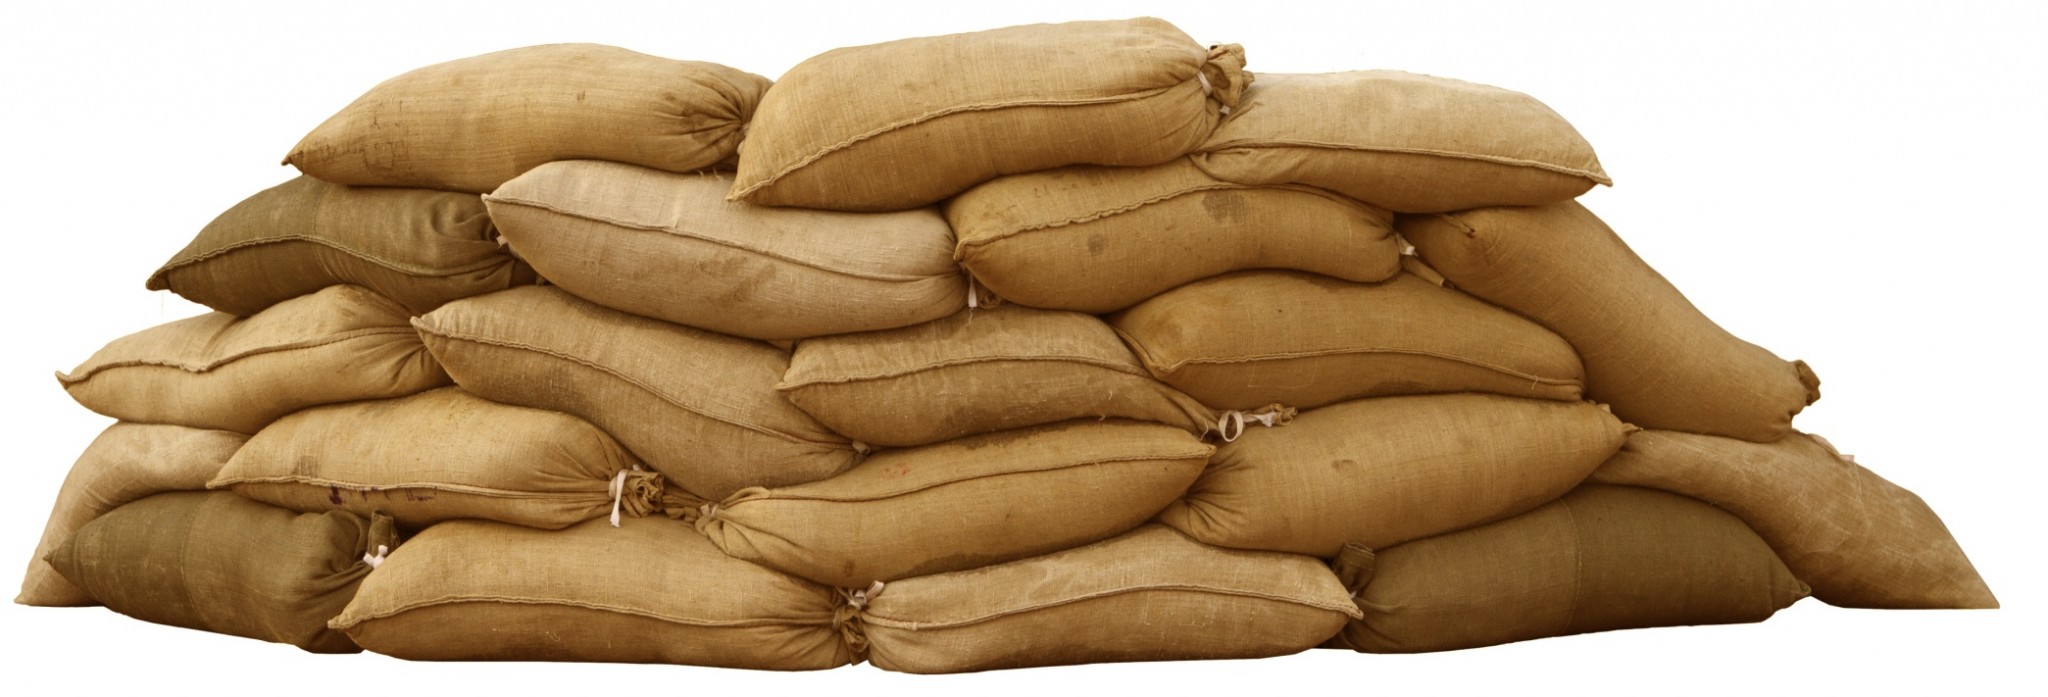 Sandbags available to the public